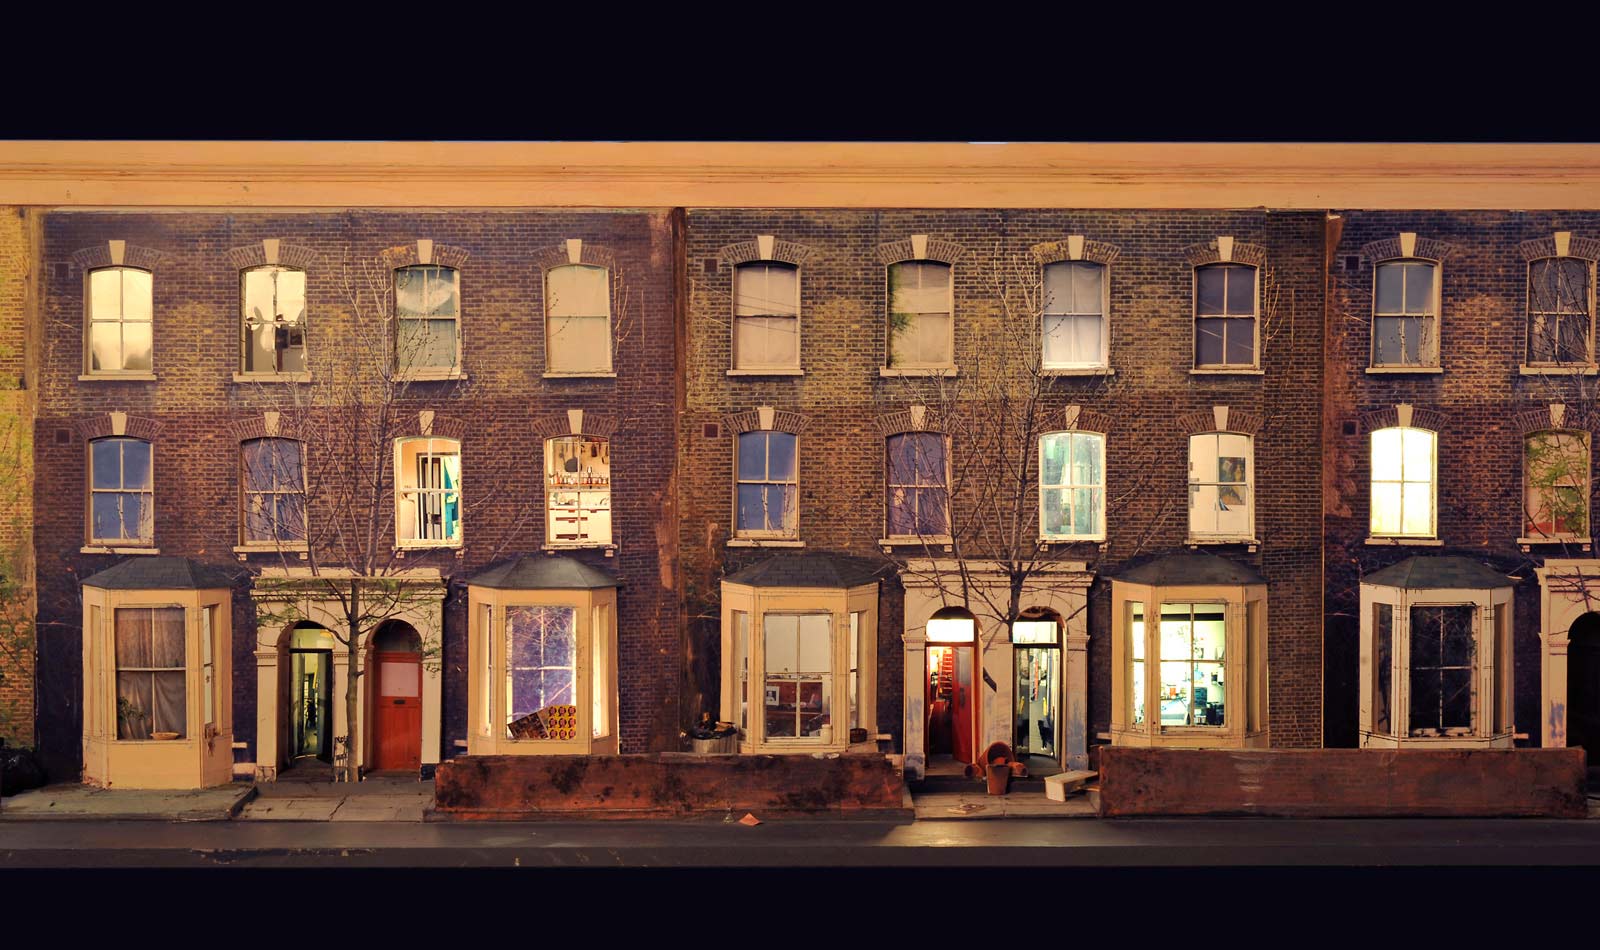 Tom Hunter's scale model of two London streets, known as the 